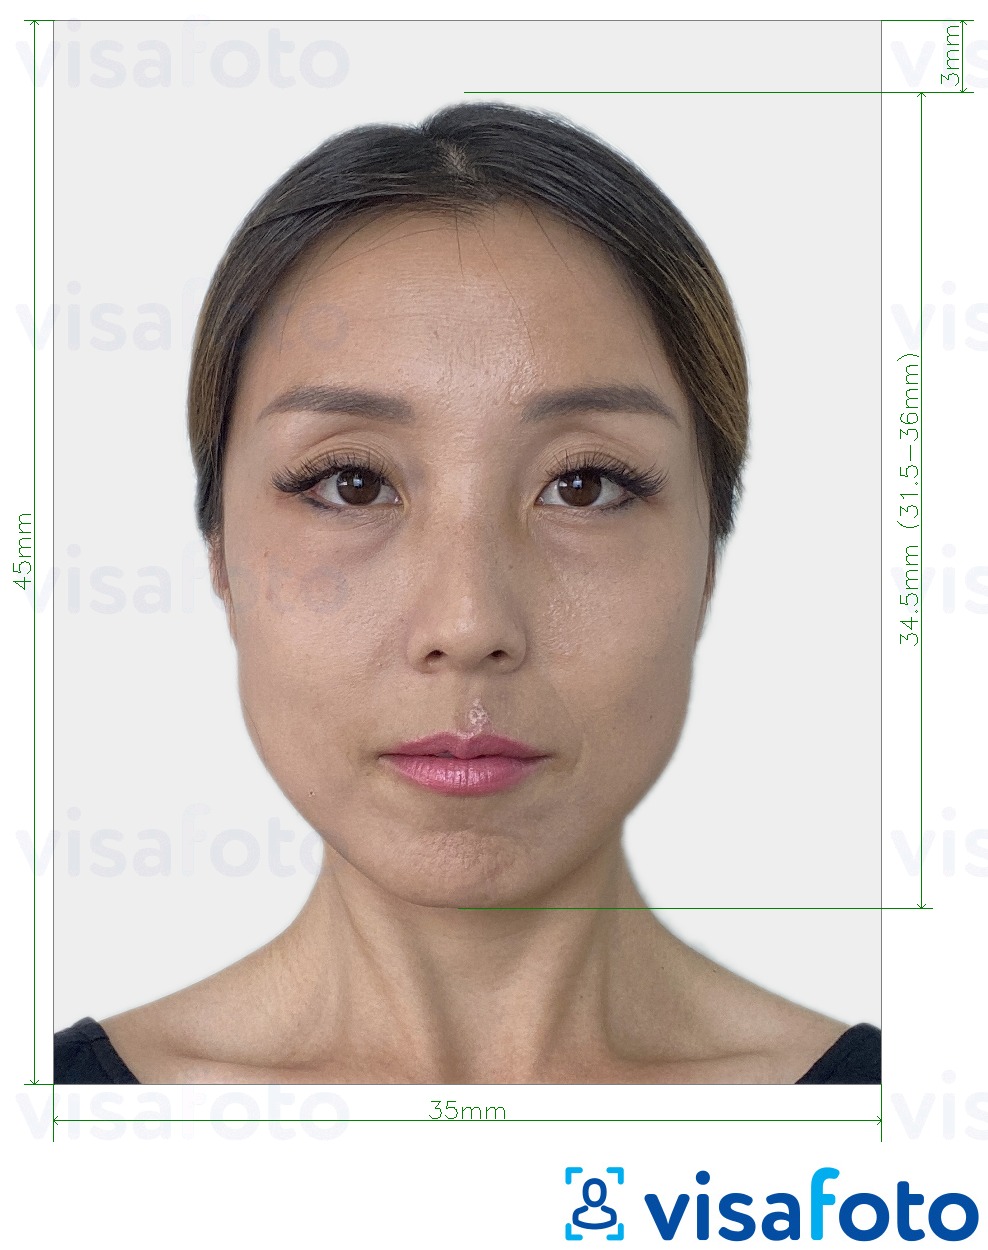 Example of photo for South Korea Visa 35x45 mm (3.5x4.5 cm) with exact size specification